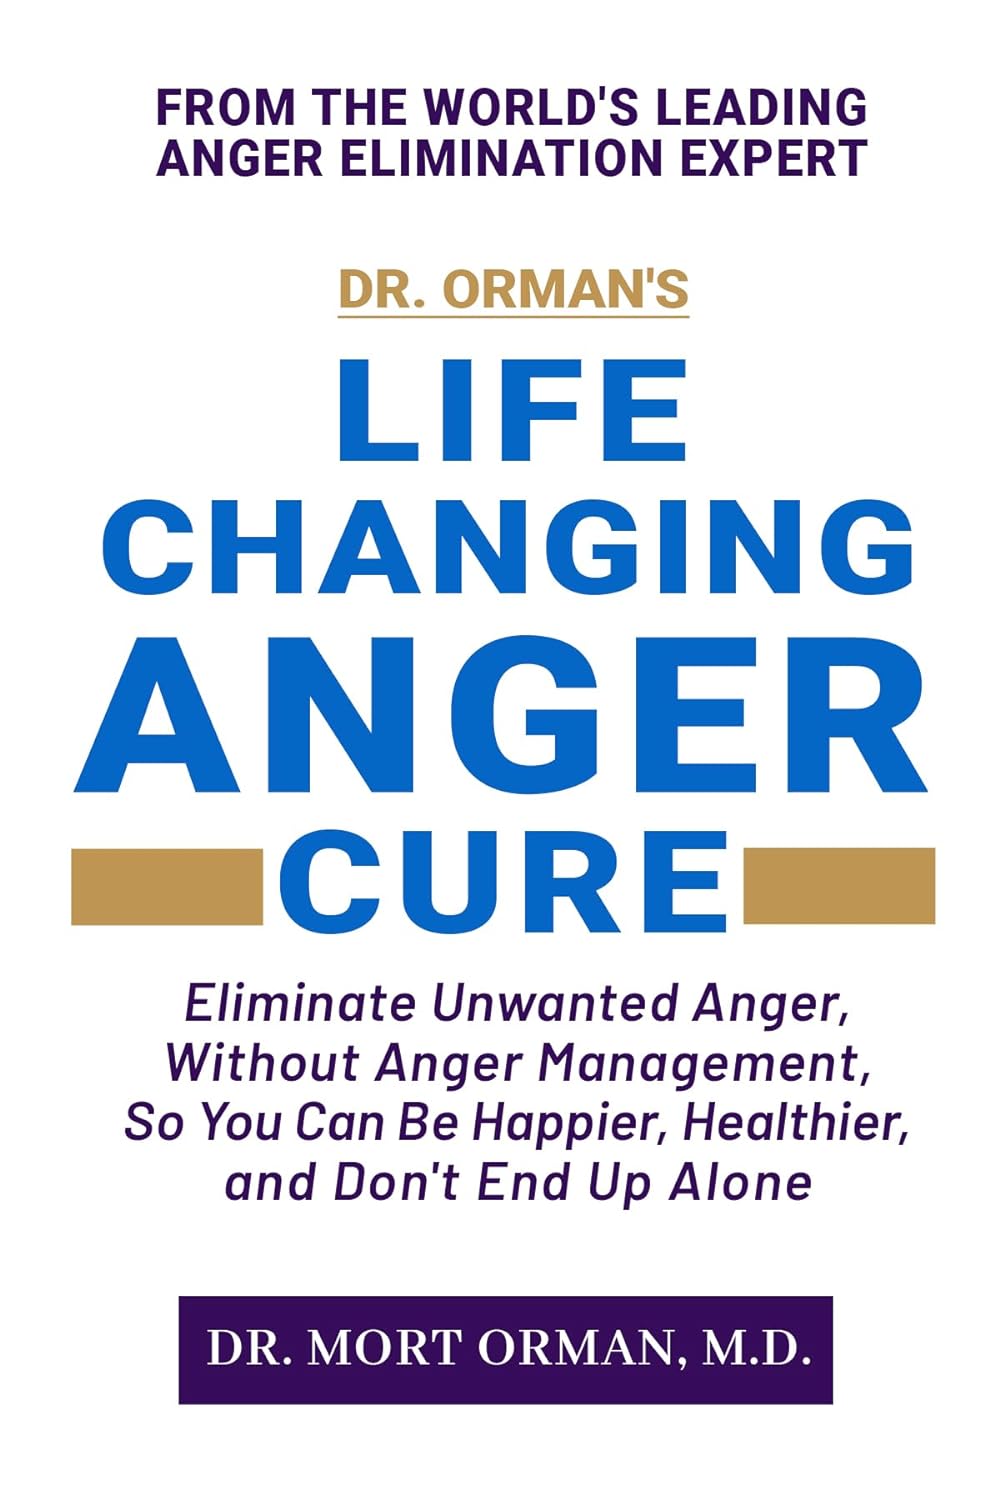 Dr. Orman’s Life Changing Anger Cure